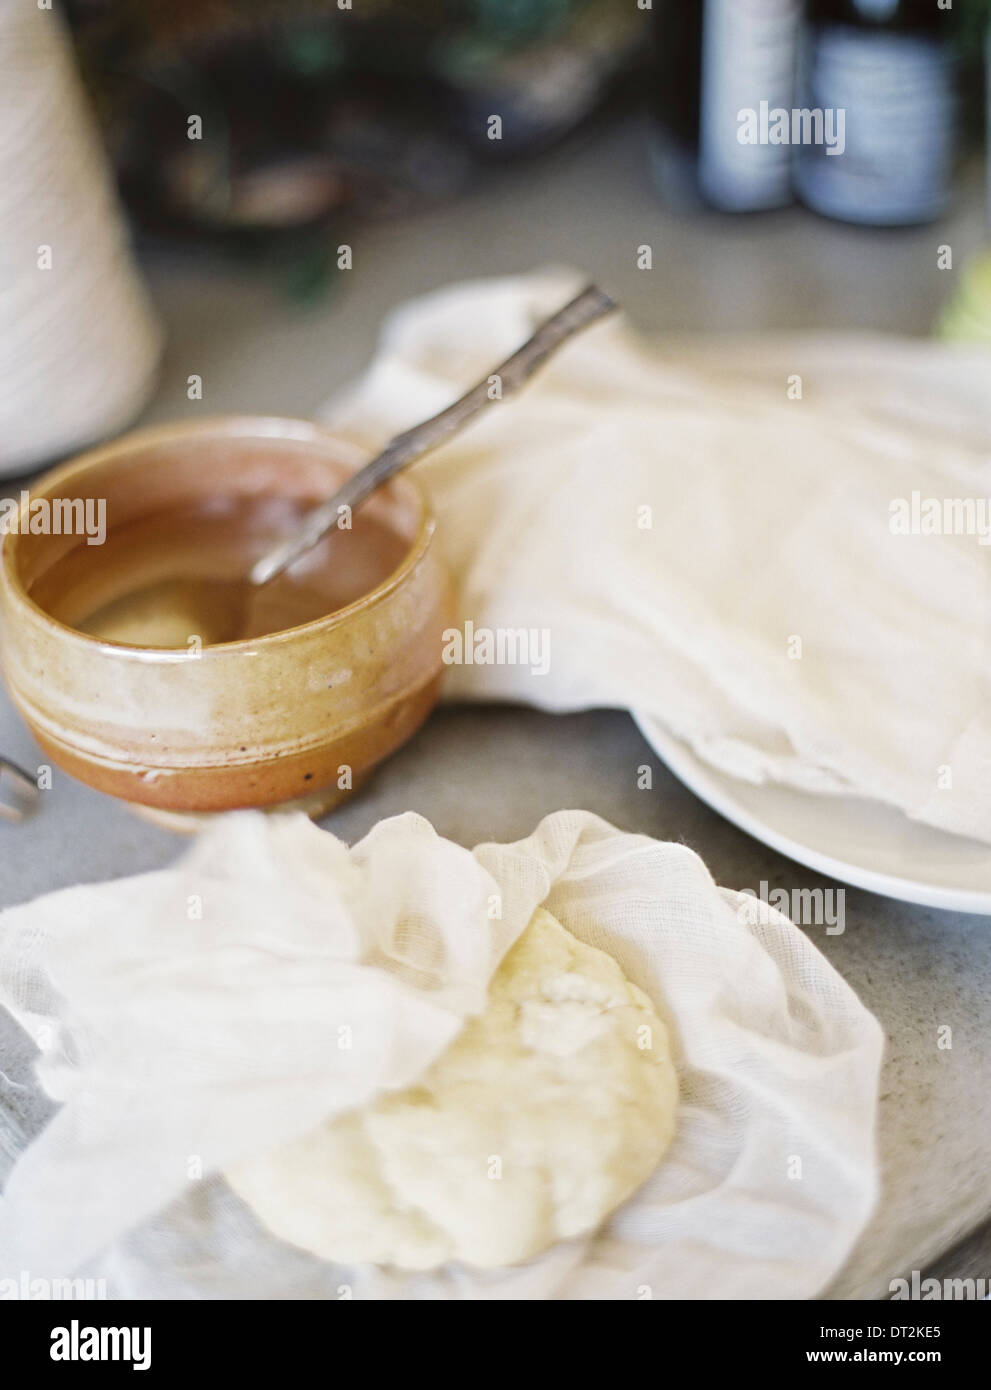 A tabletop in a domestic kitchen A bowl of liquid with a spoon in it A block of fresh pastry partly wrapped in a muslin square Stock Photo